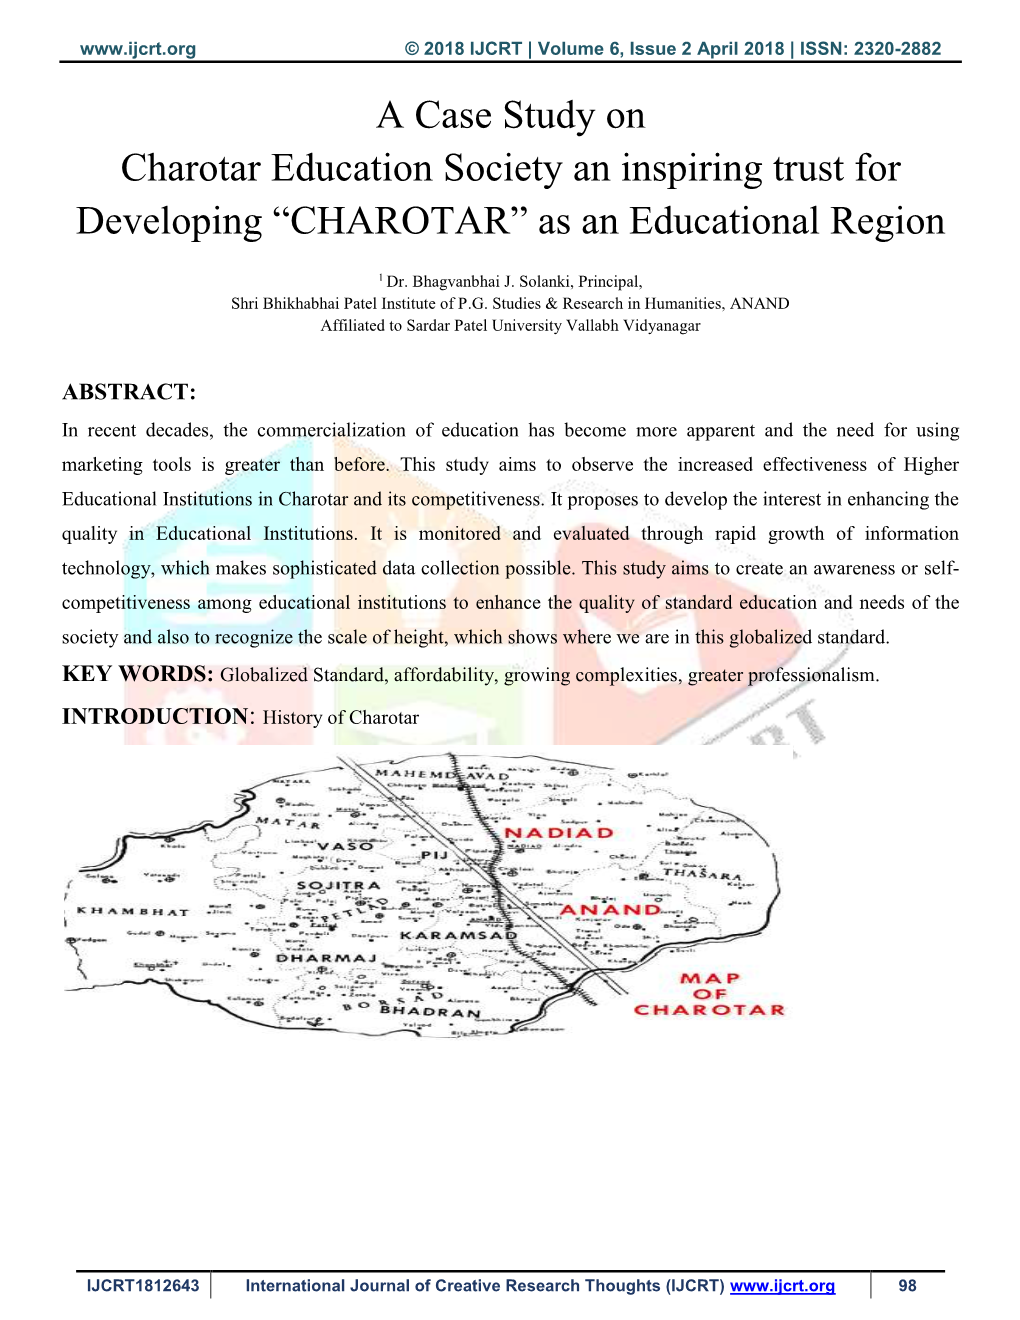 A Case Study on Charotar Education Society an Inspiring Trust for Developing “CHAROTAR” As an Educational Region